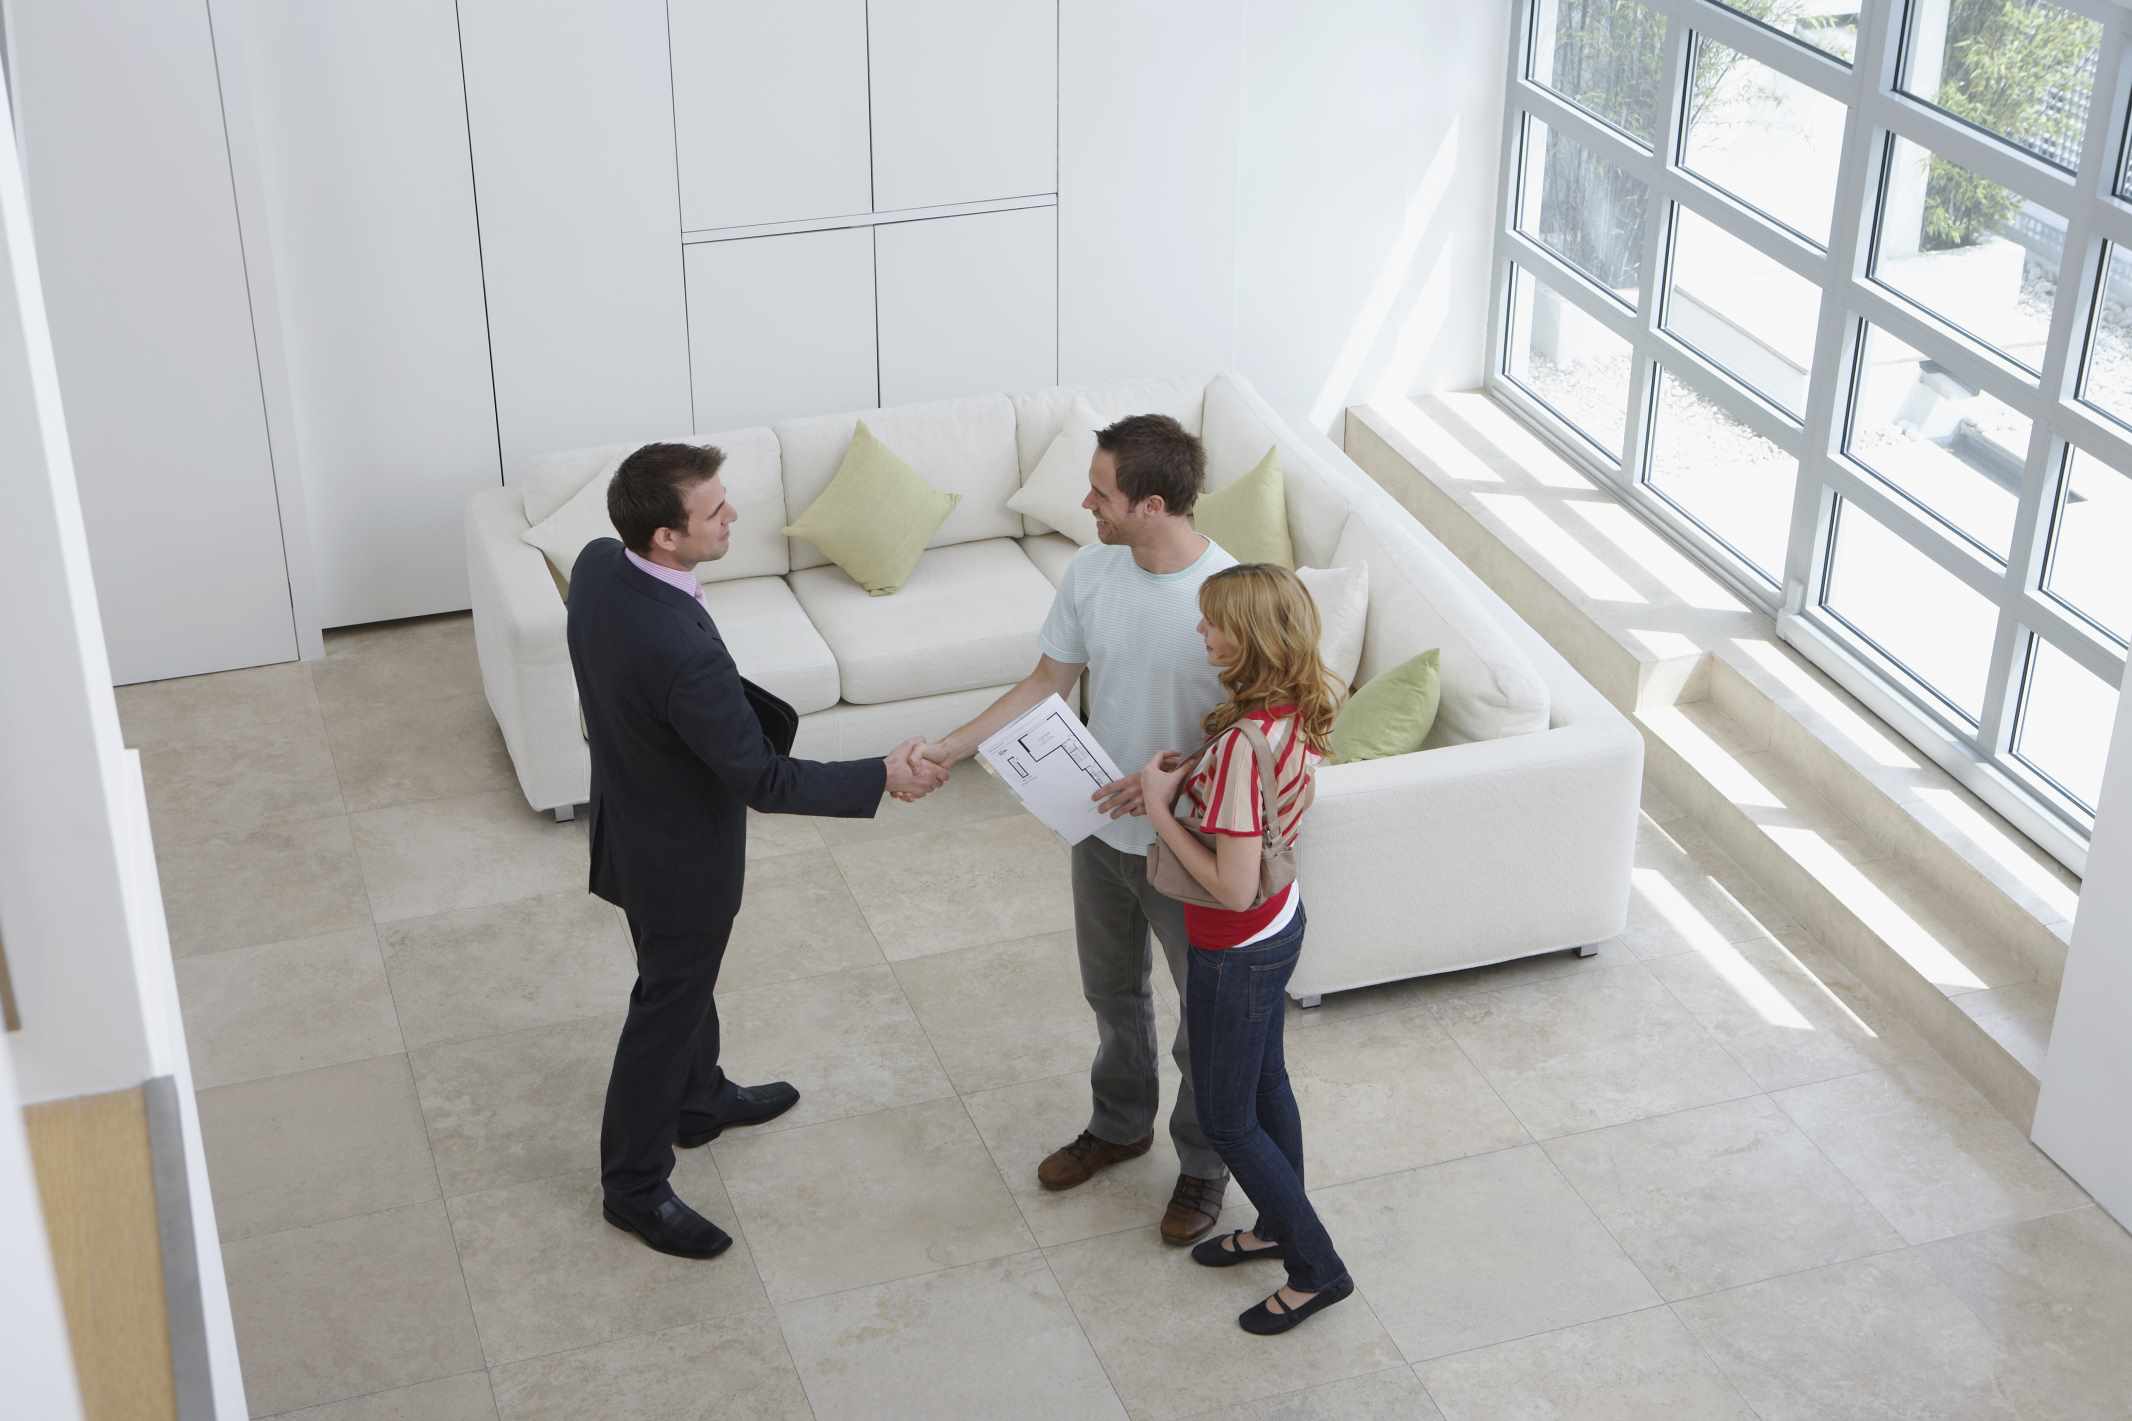 Hiring an experienced property manager can be the right choice for you